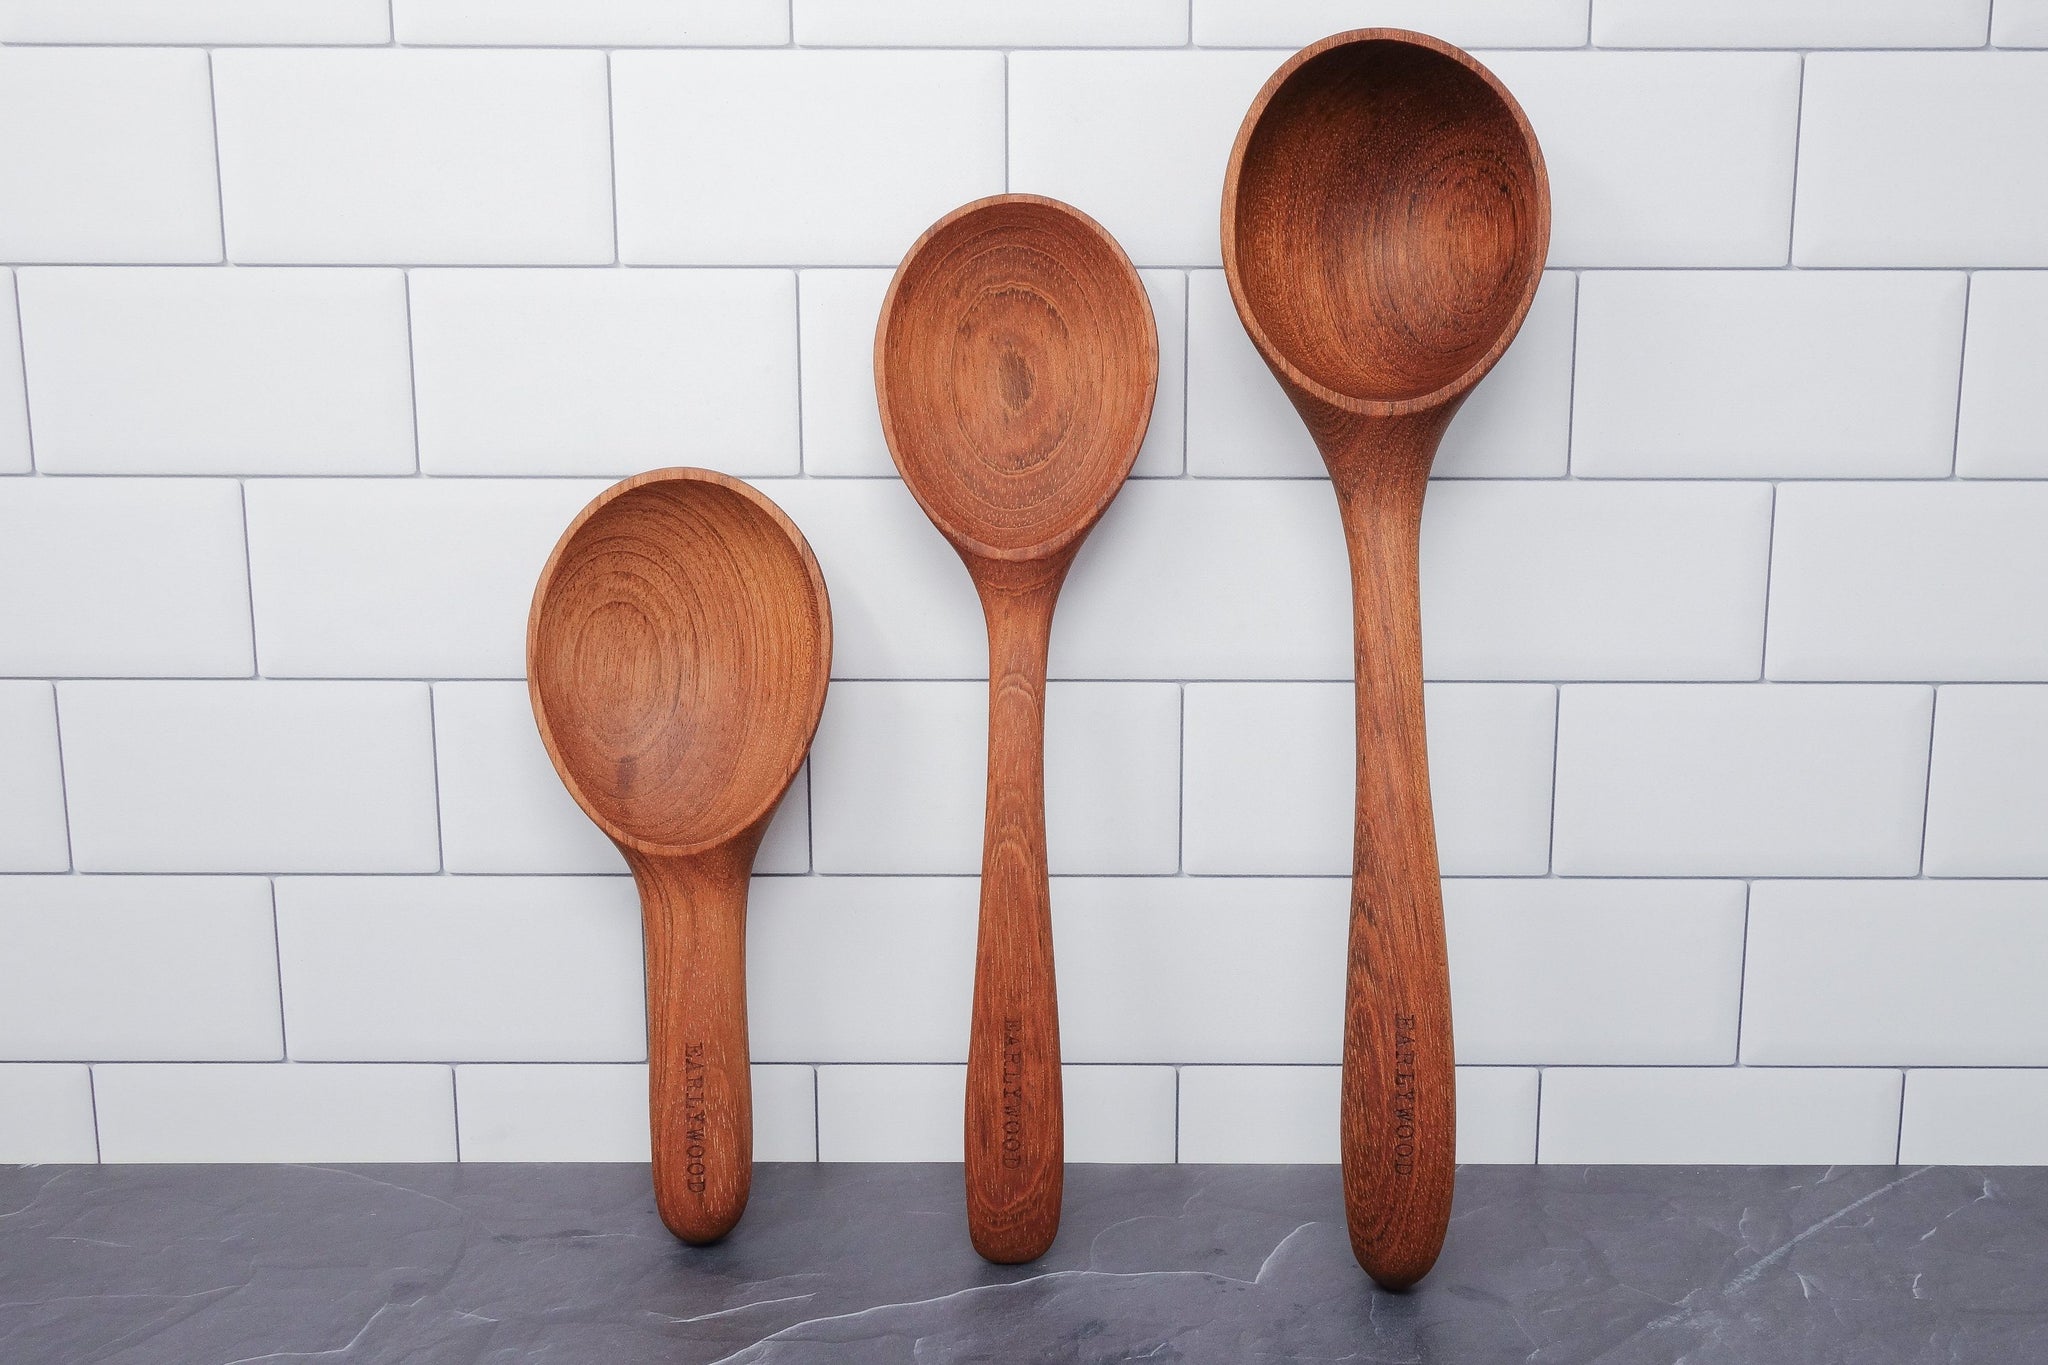 wooden serving spoon set - Earlywood